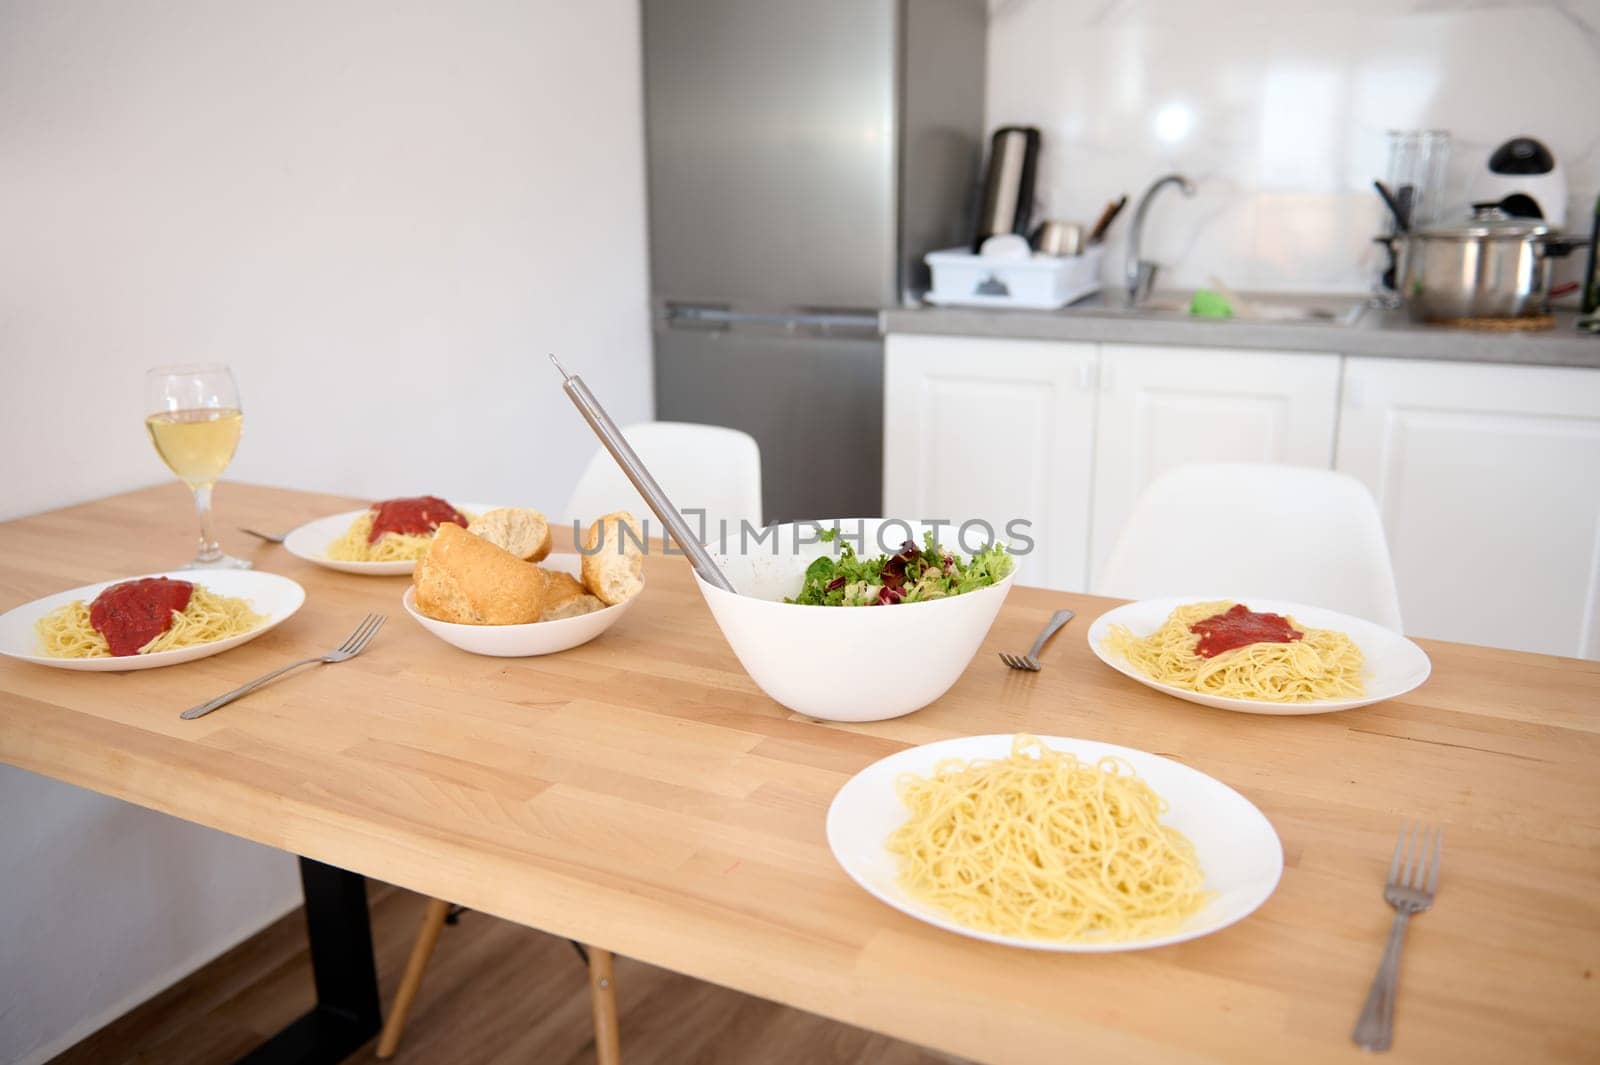 A served table with traditional Italian spaghetti and tomato sauce in white plates, a bowl with wholesome salad and wine in wineglass. Still life with delicious healthy lunch in the home kitchen